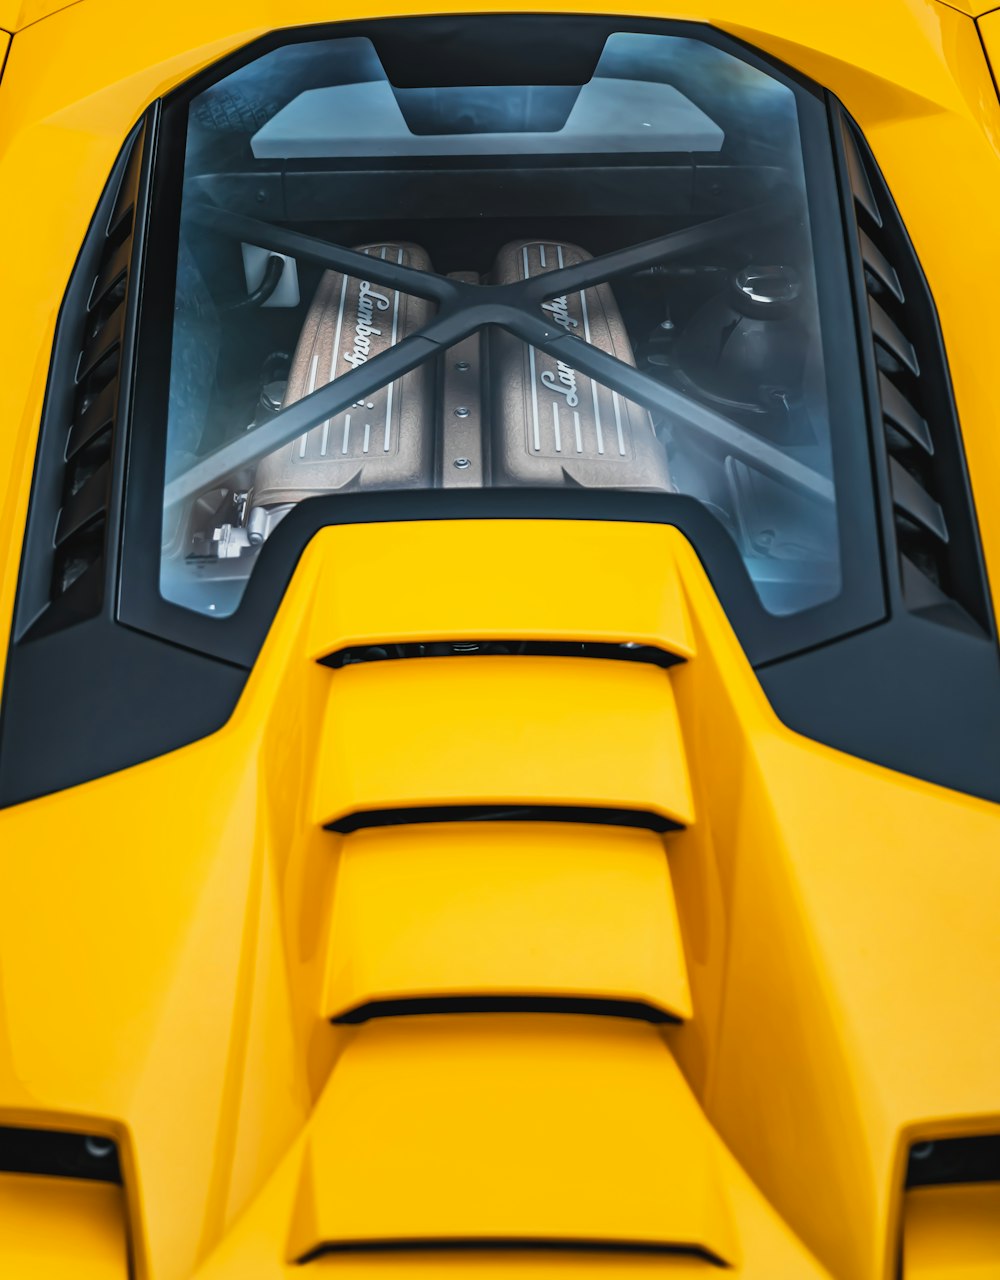 yellow and black train during daytime